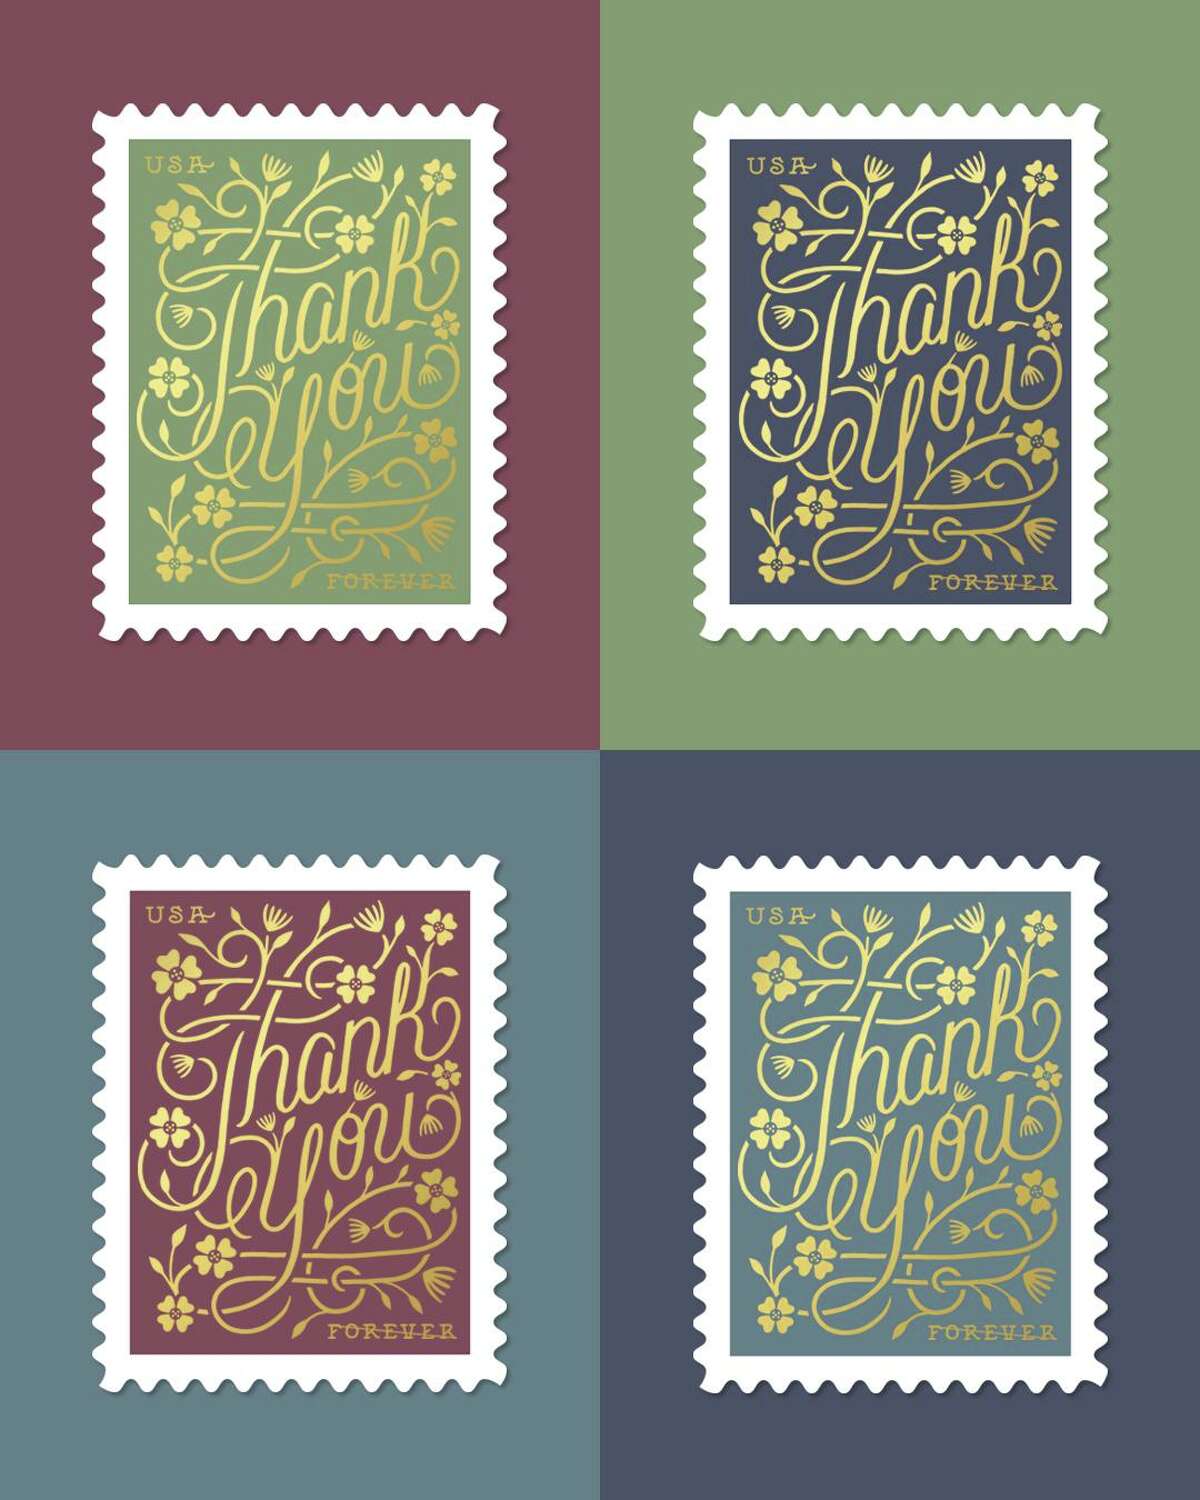 Artist and Houston native Dana Tanamachi designed "Thank You" stamps for USPS.